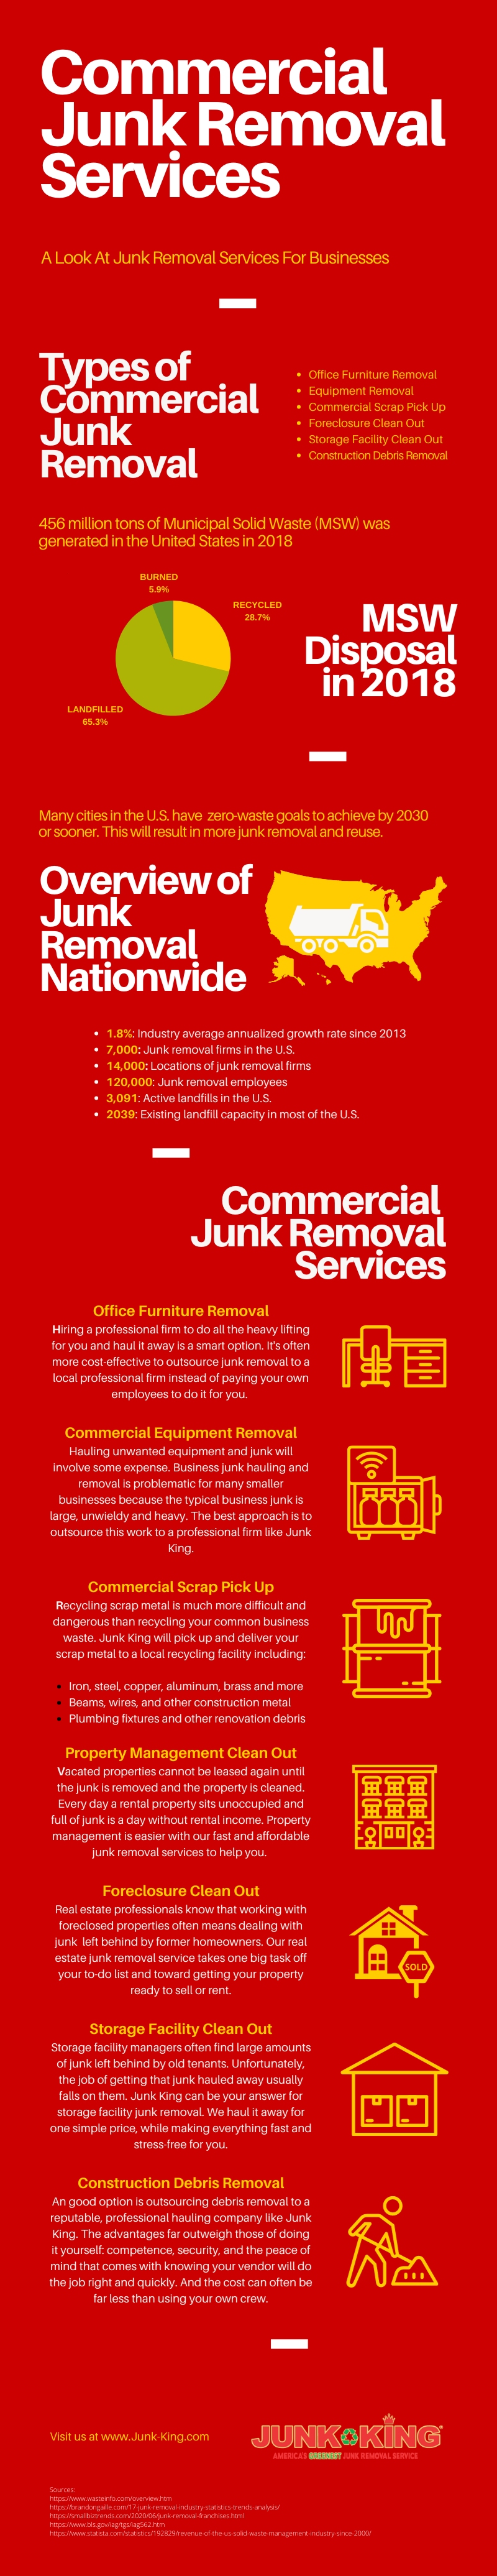 commercial-junk-removal-services